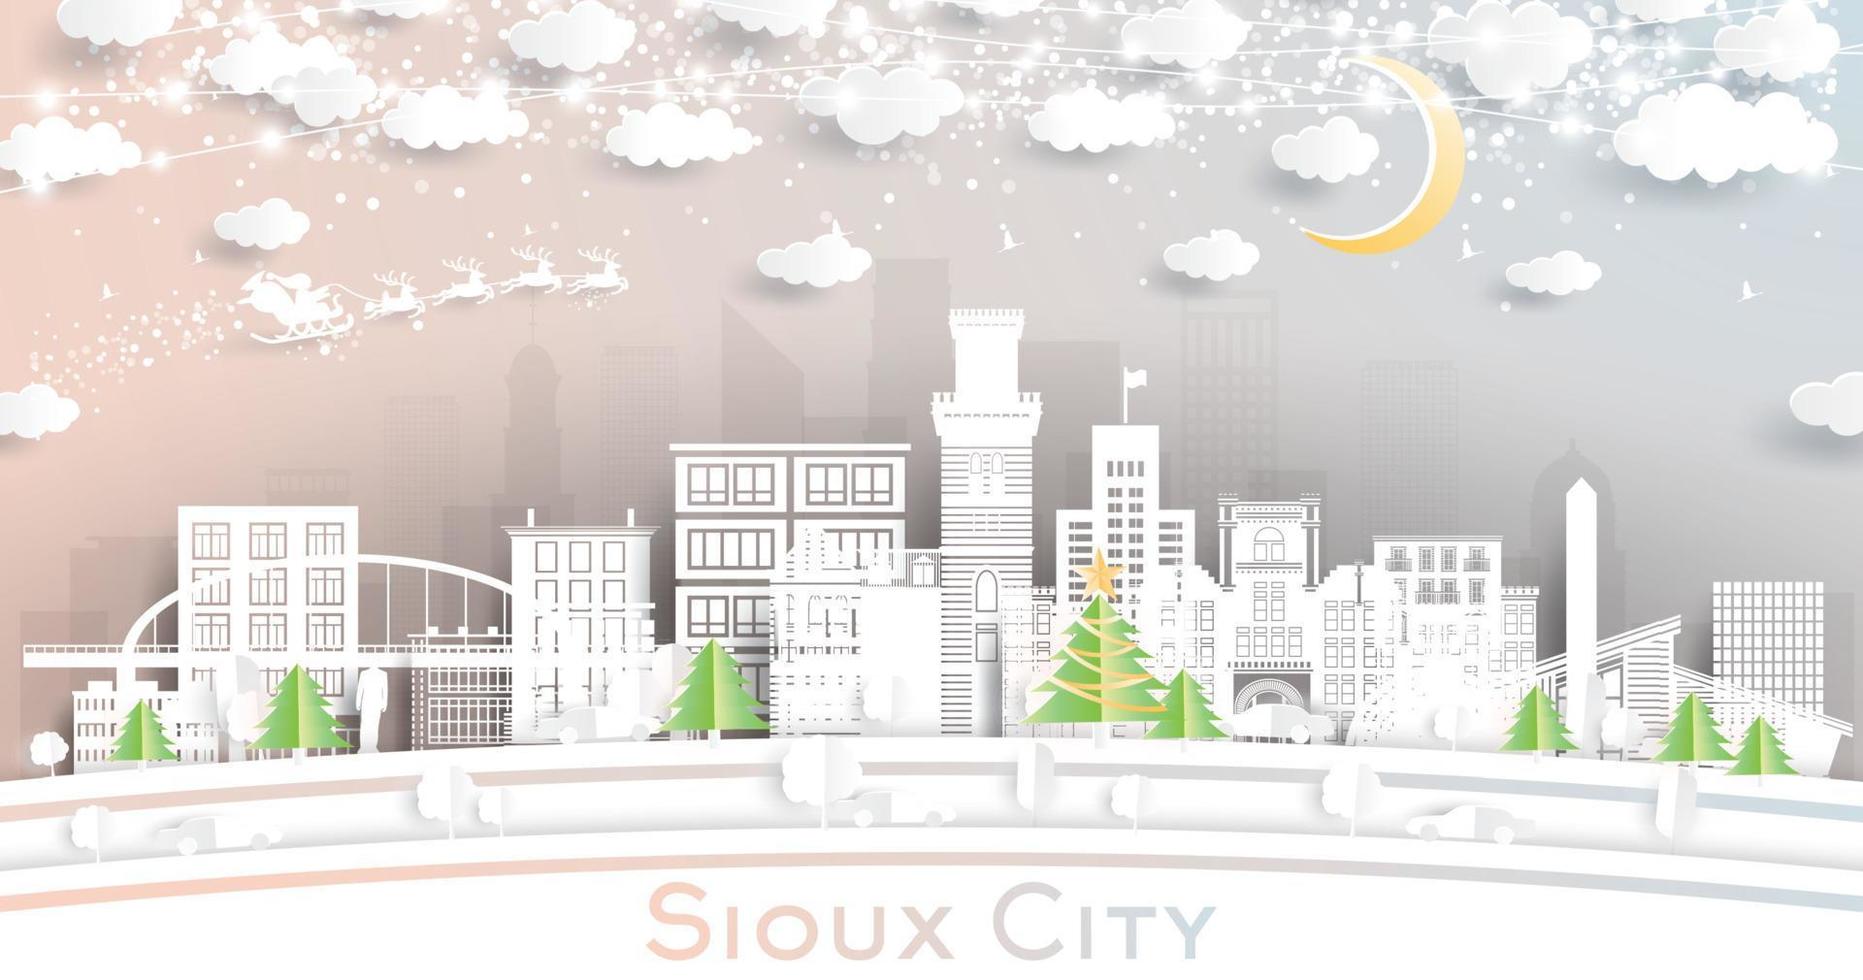 Sioux City Iowa City Skyline in Paper Cut Style with Snowflakes, Moon and Neon Garland. vector